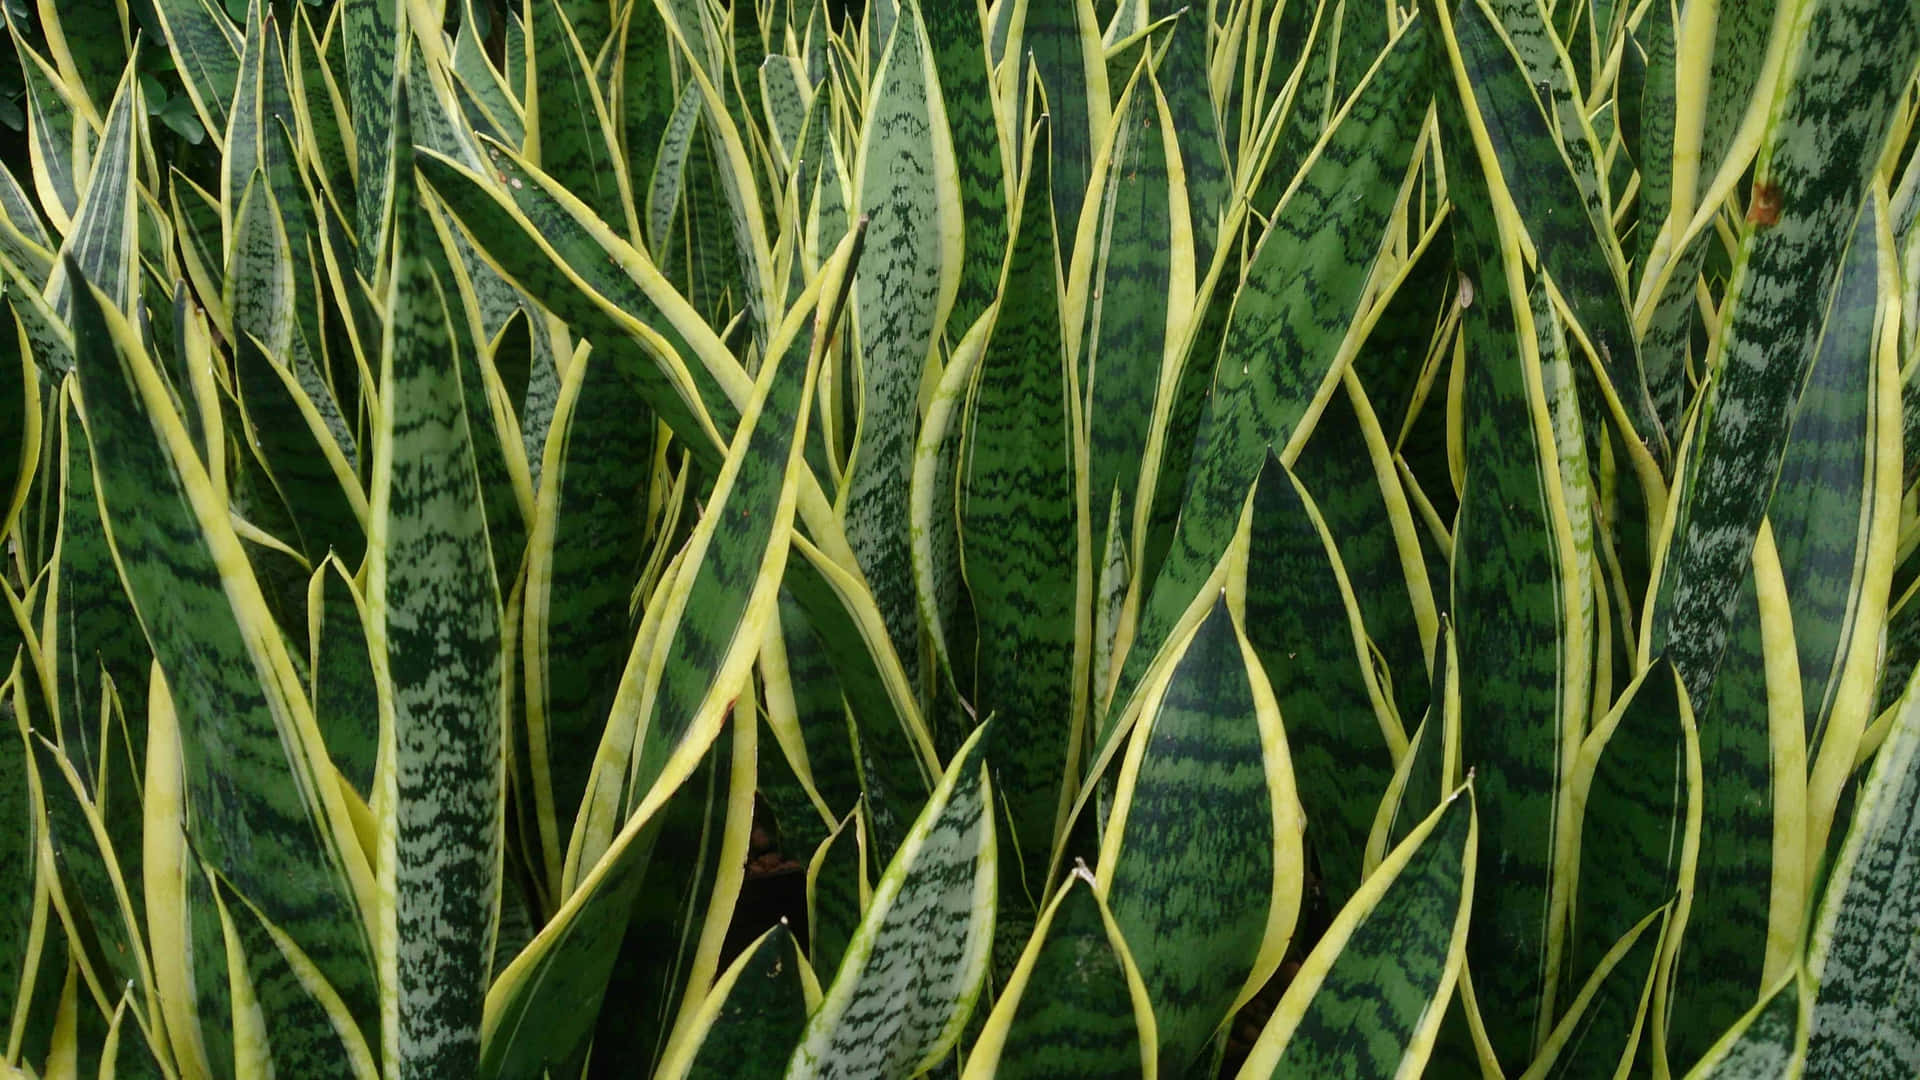 A Close Up Of A Plant With Yellow And Green Stripes